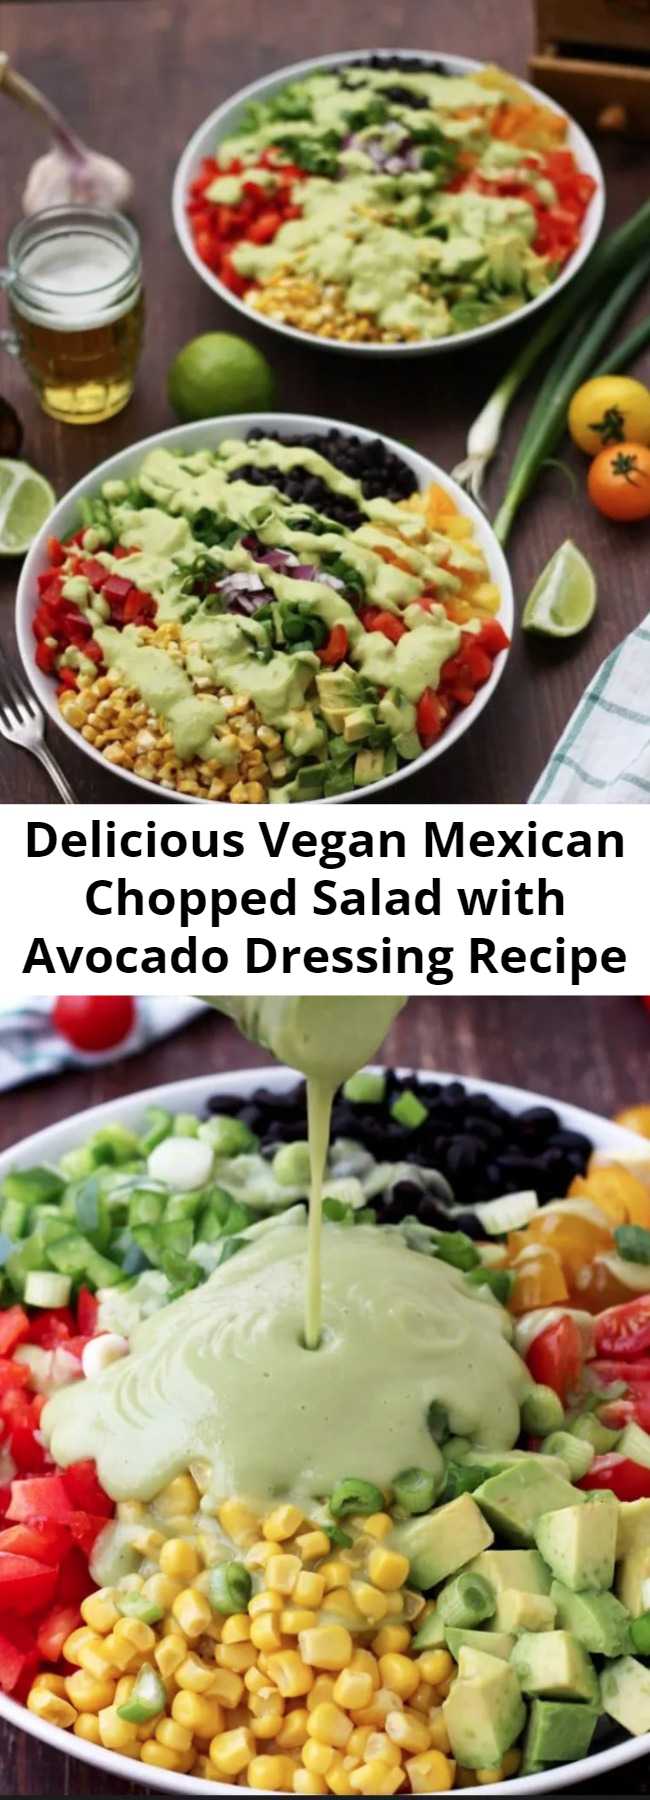 Mexican Chopped Salad with Avocado Dressing Recipe - Delicious vegan Mexican chopped salad with avocado dressing makes the perfect lunch salad or an easy side dish to any Mexican feast. This gluten free salad is packed with fresh veggies, dietary fiber and plant based protein.